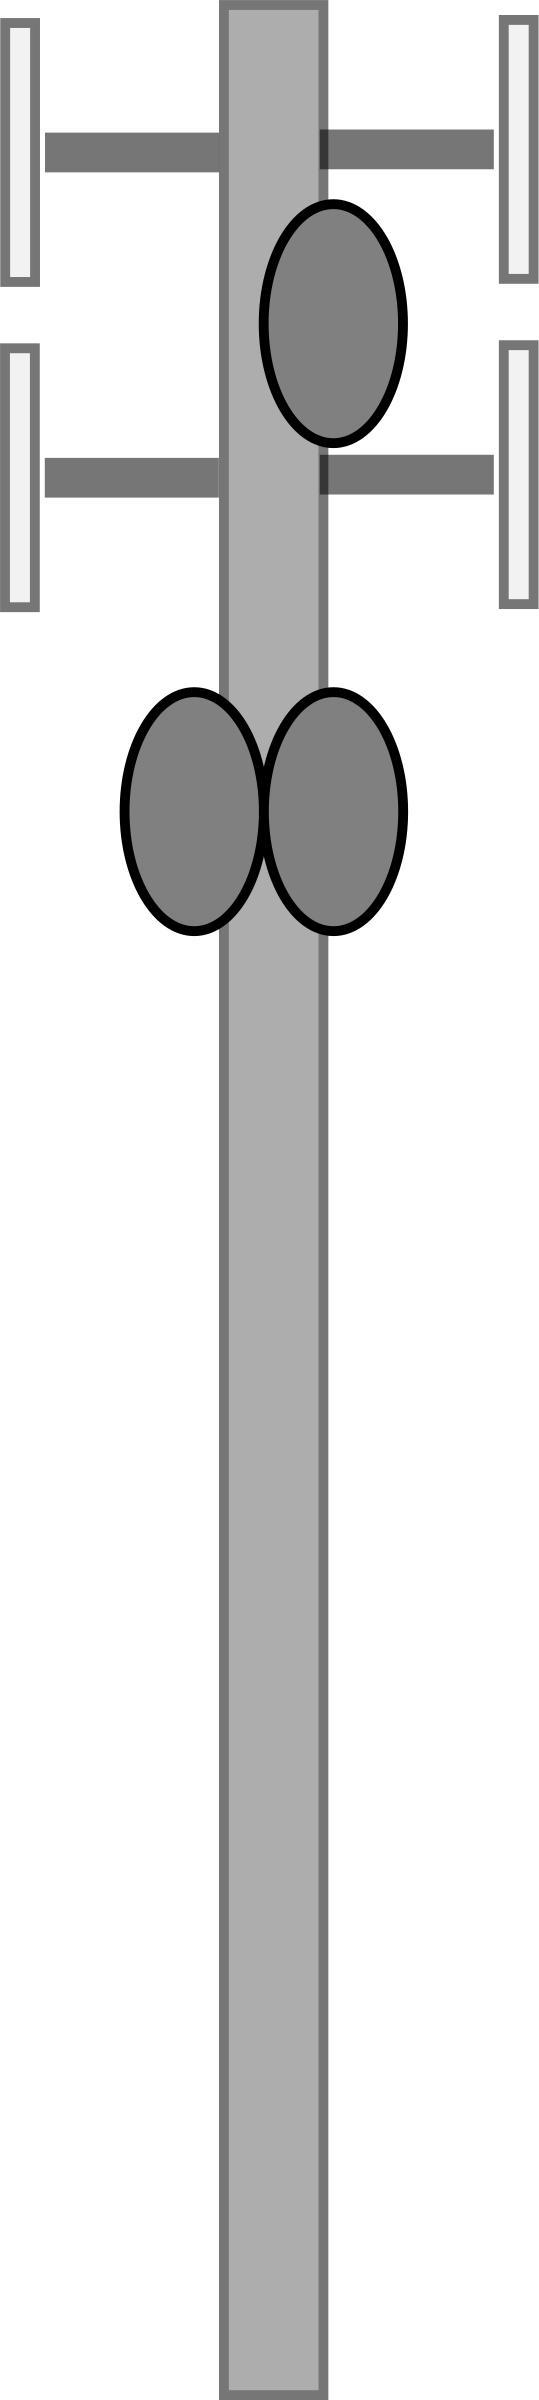 cell phone tower png transparent